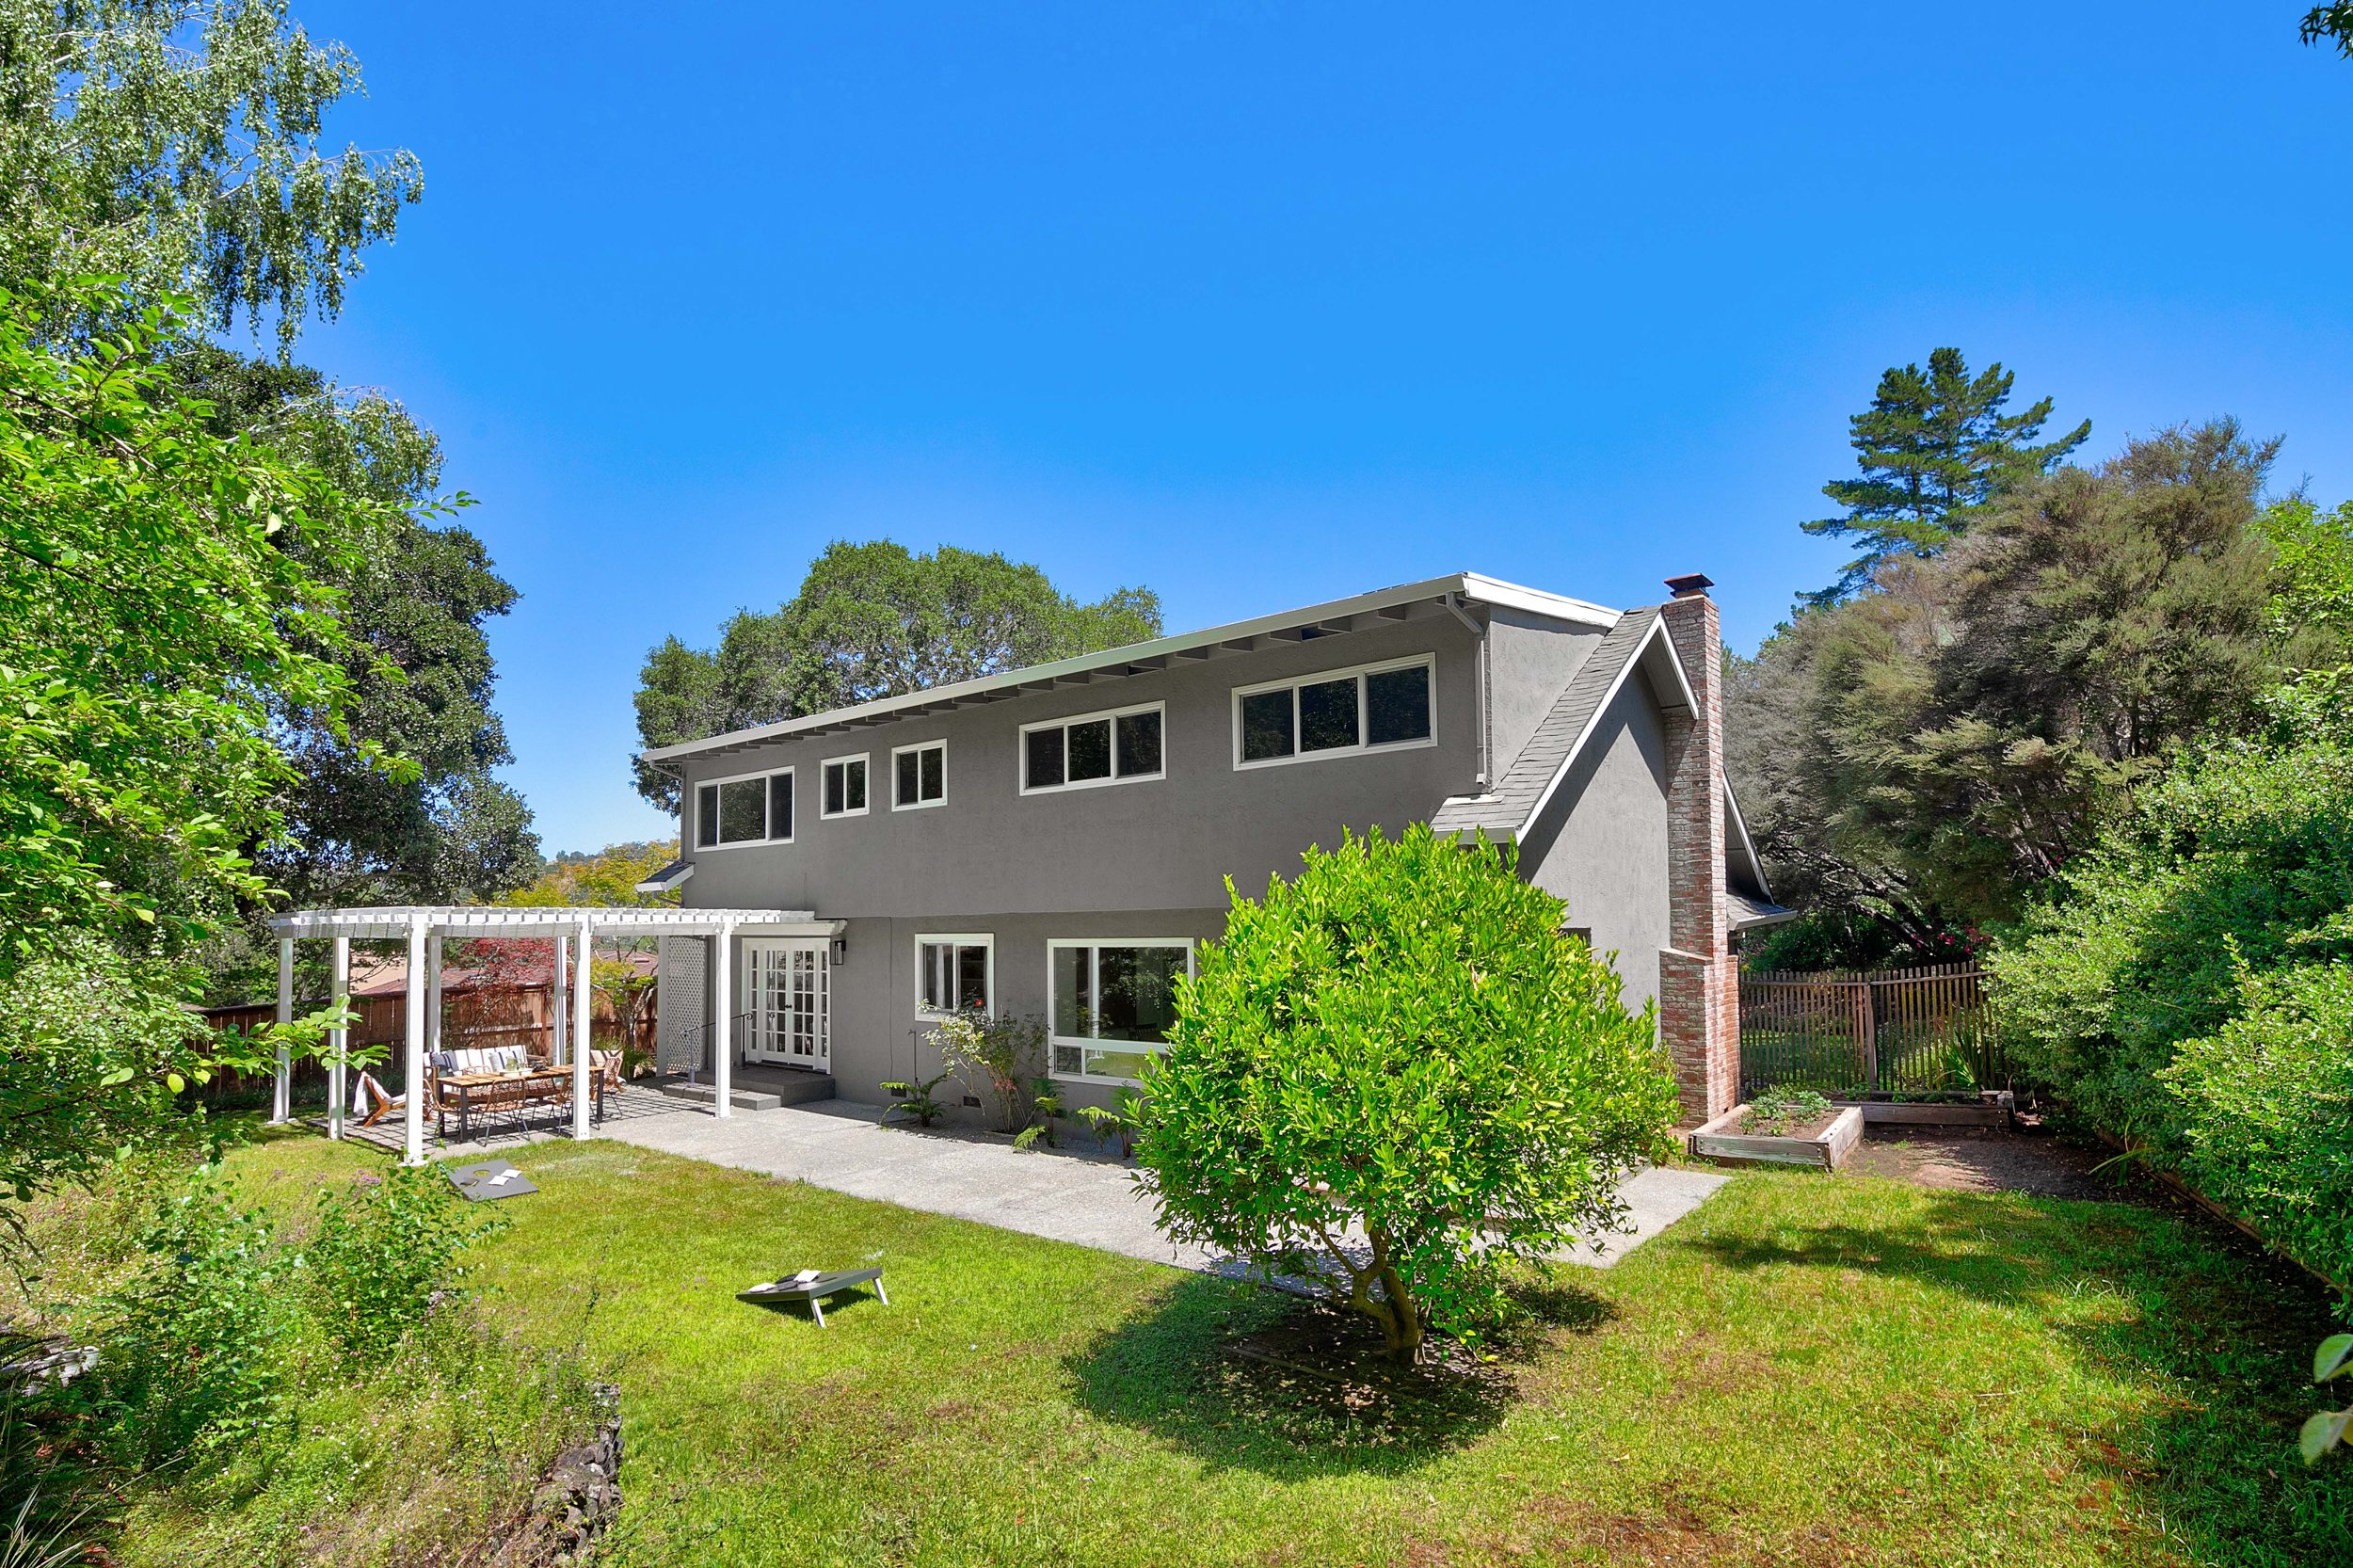 70 Pebble Beach Drive, Novato Real Estate by Allie Fornesi at Own Marin-23.jpg